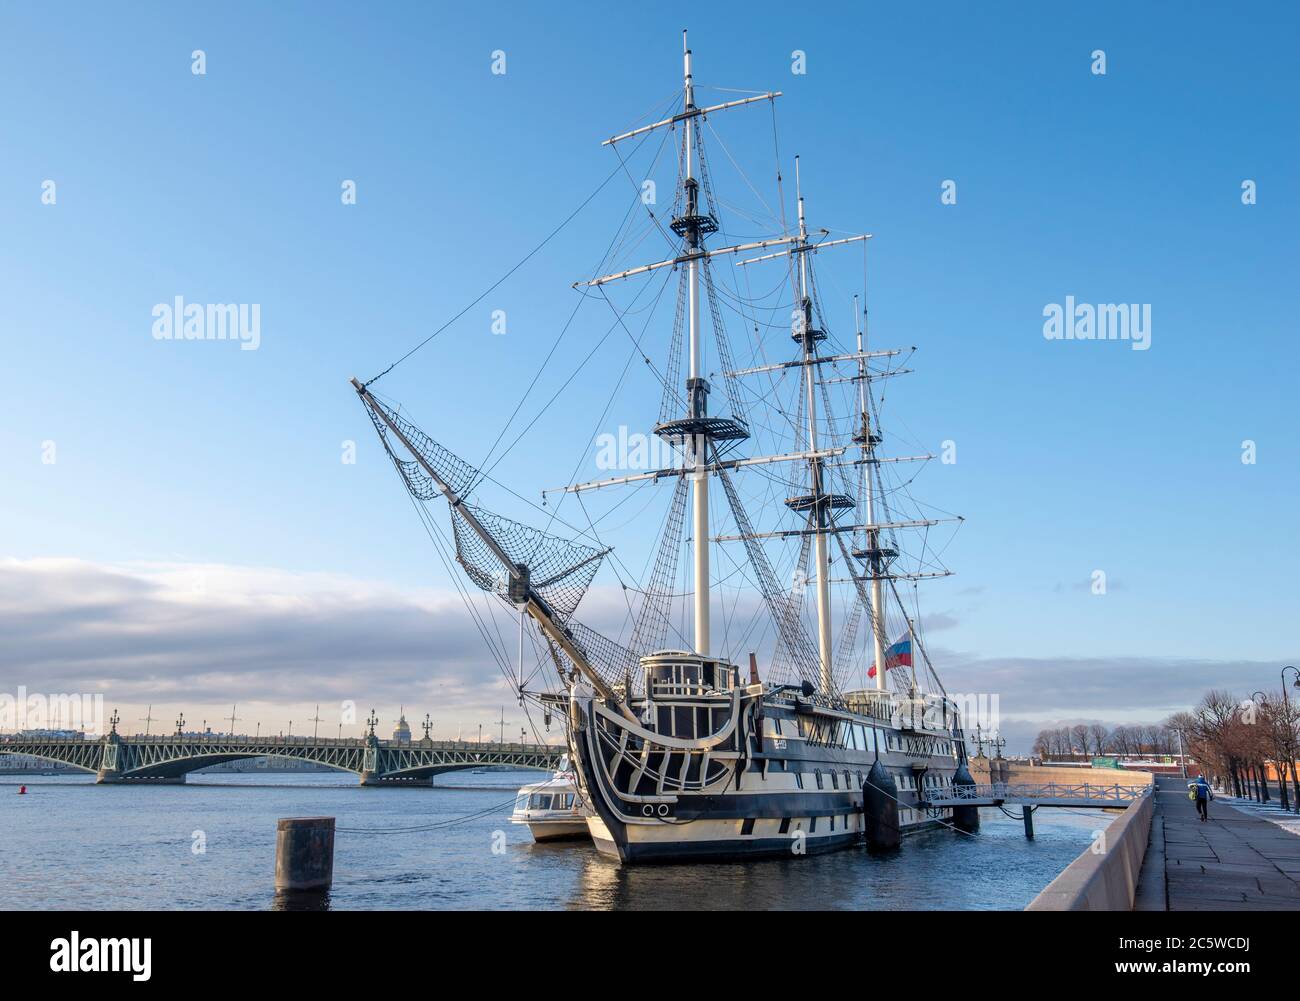 Saint Petersburg, Russia. A wooden old warship converted into a restaurant and moored to the banks of the Neva river Stock Photo